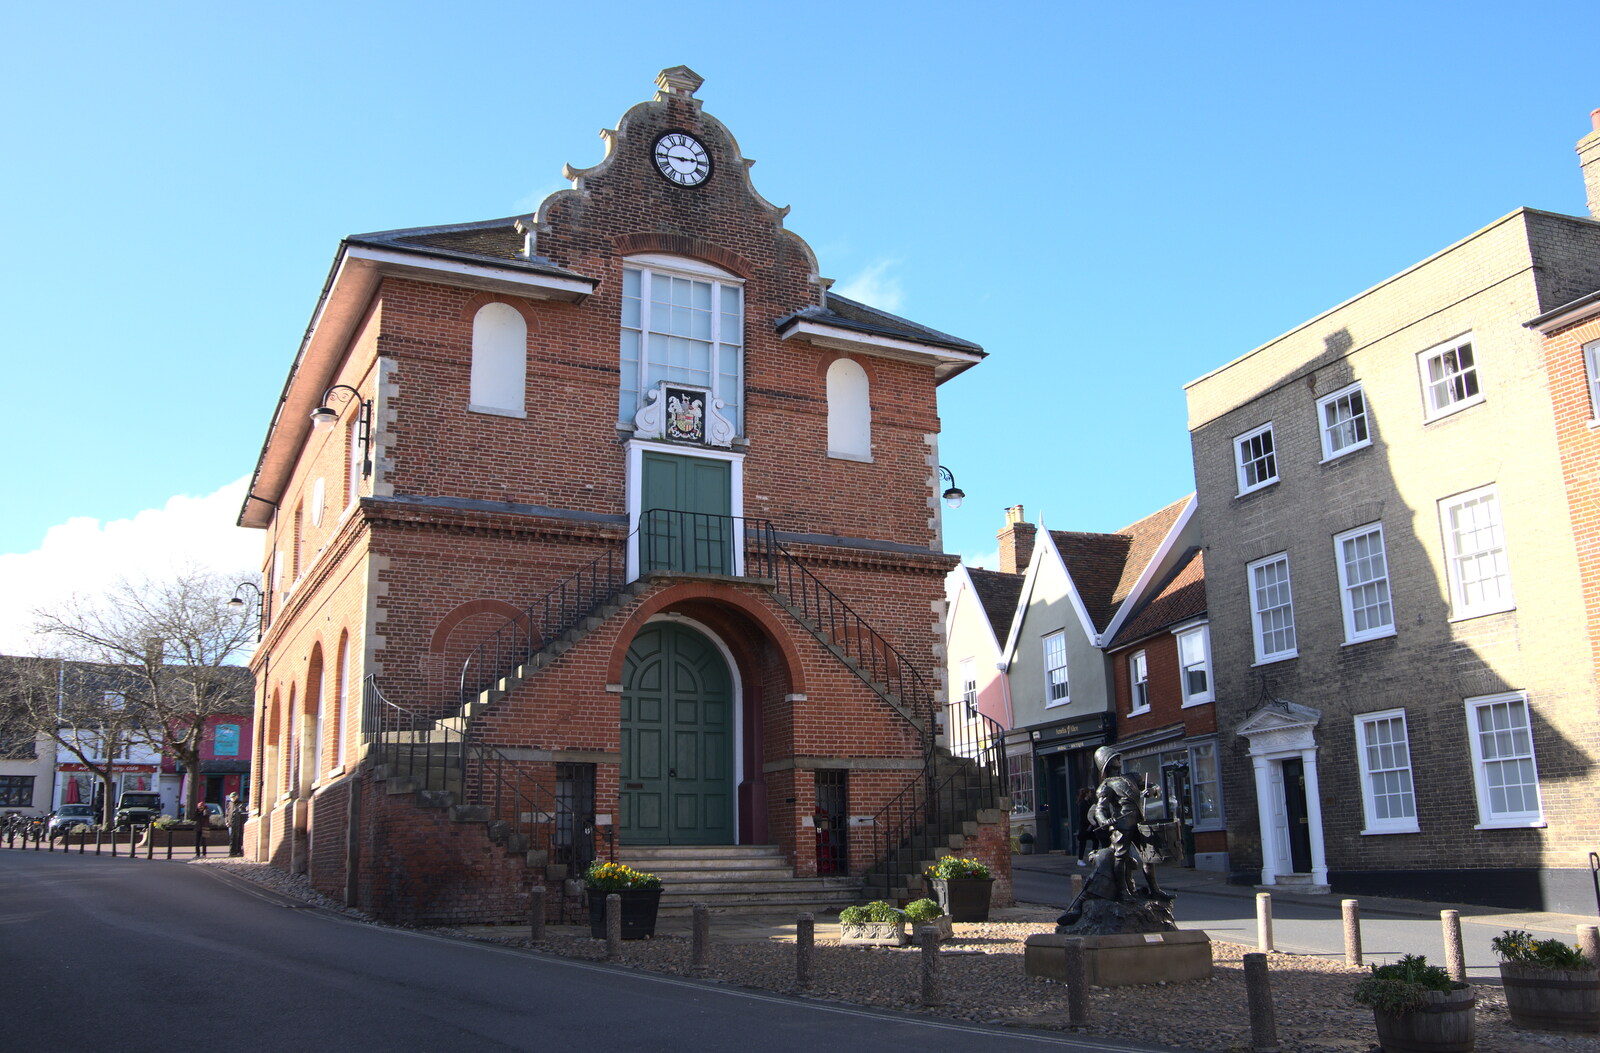 The town hall from A Trip to the Violin Shop, Woodbridge, Suffolk - 12th March 2022